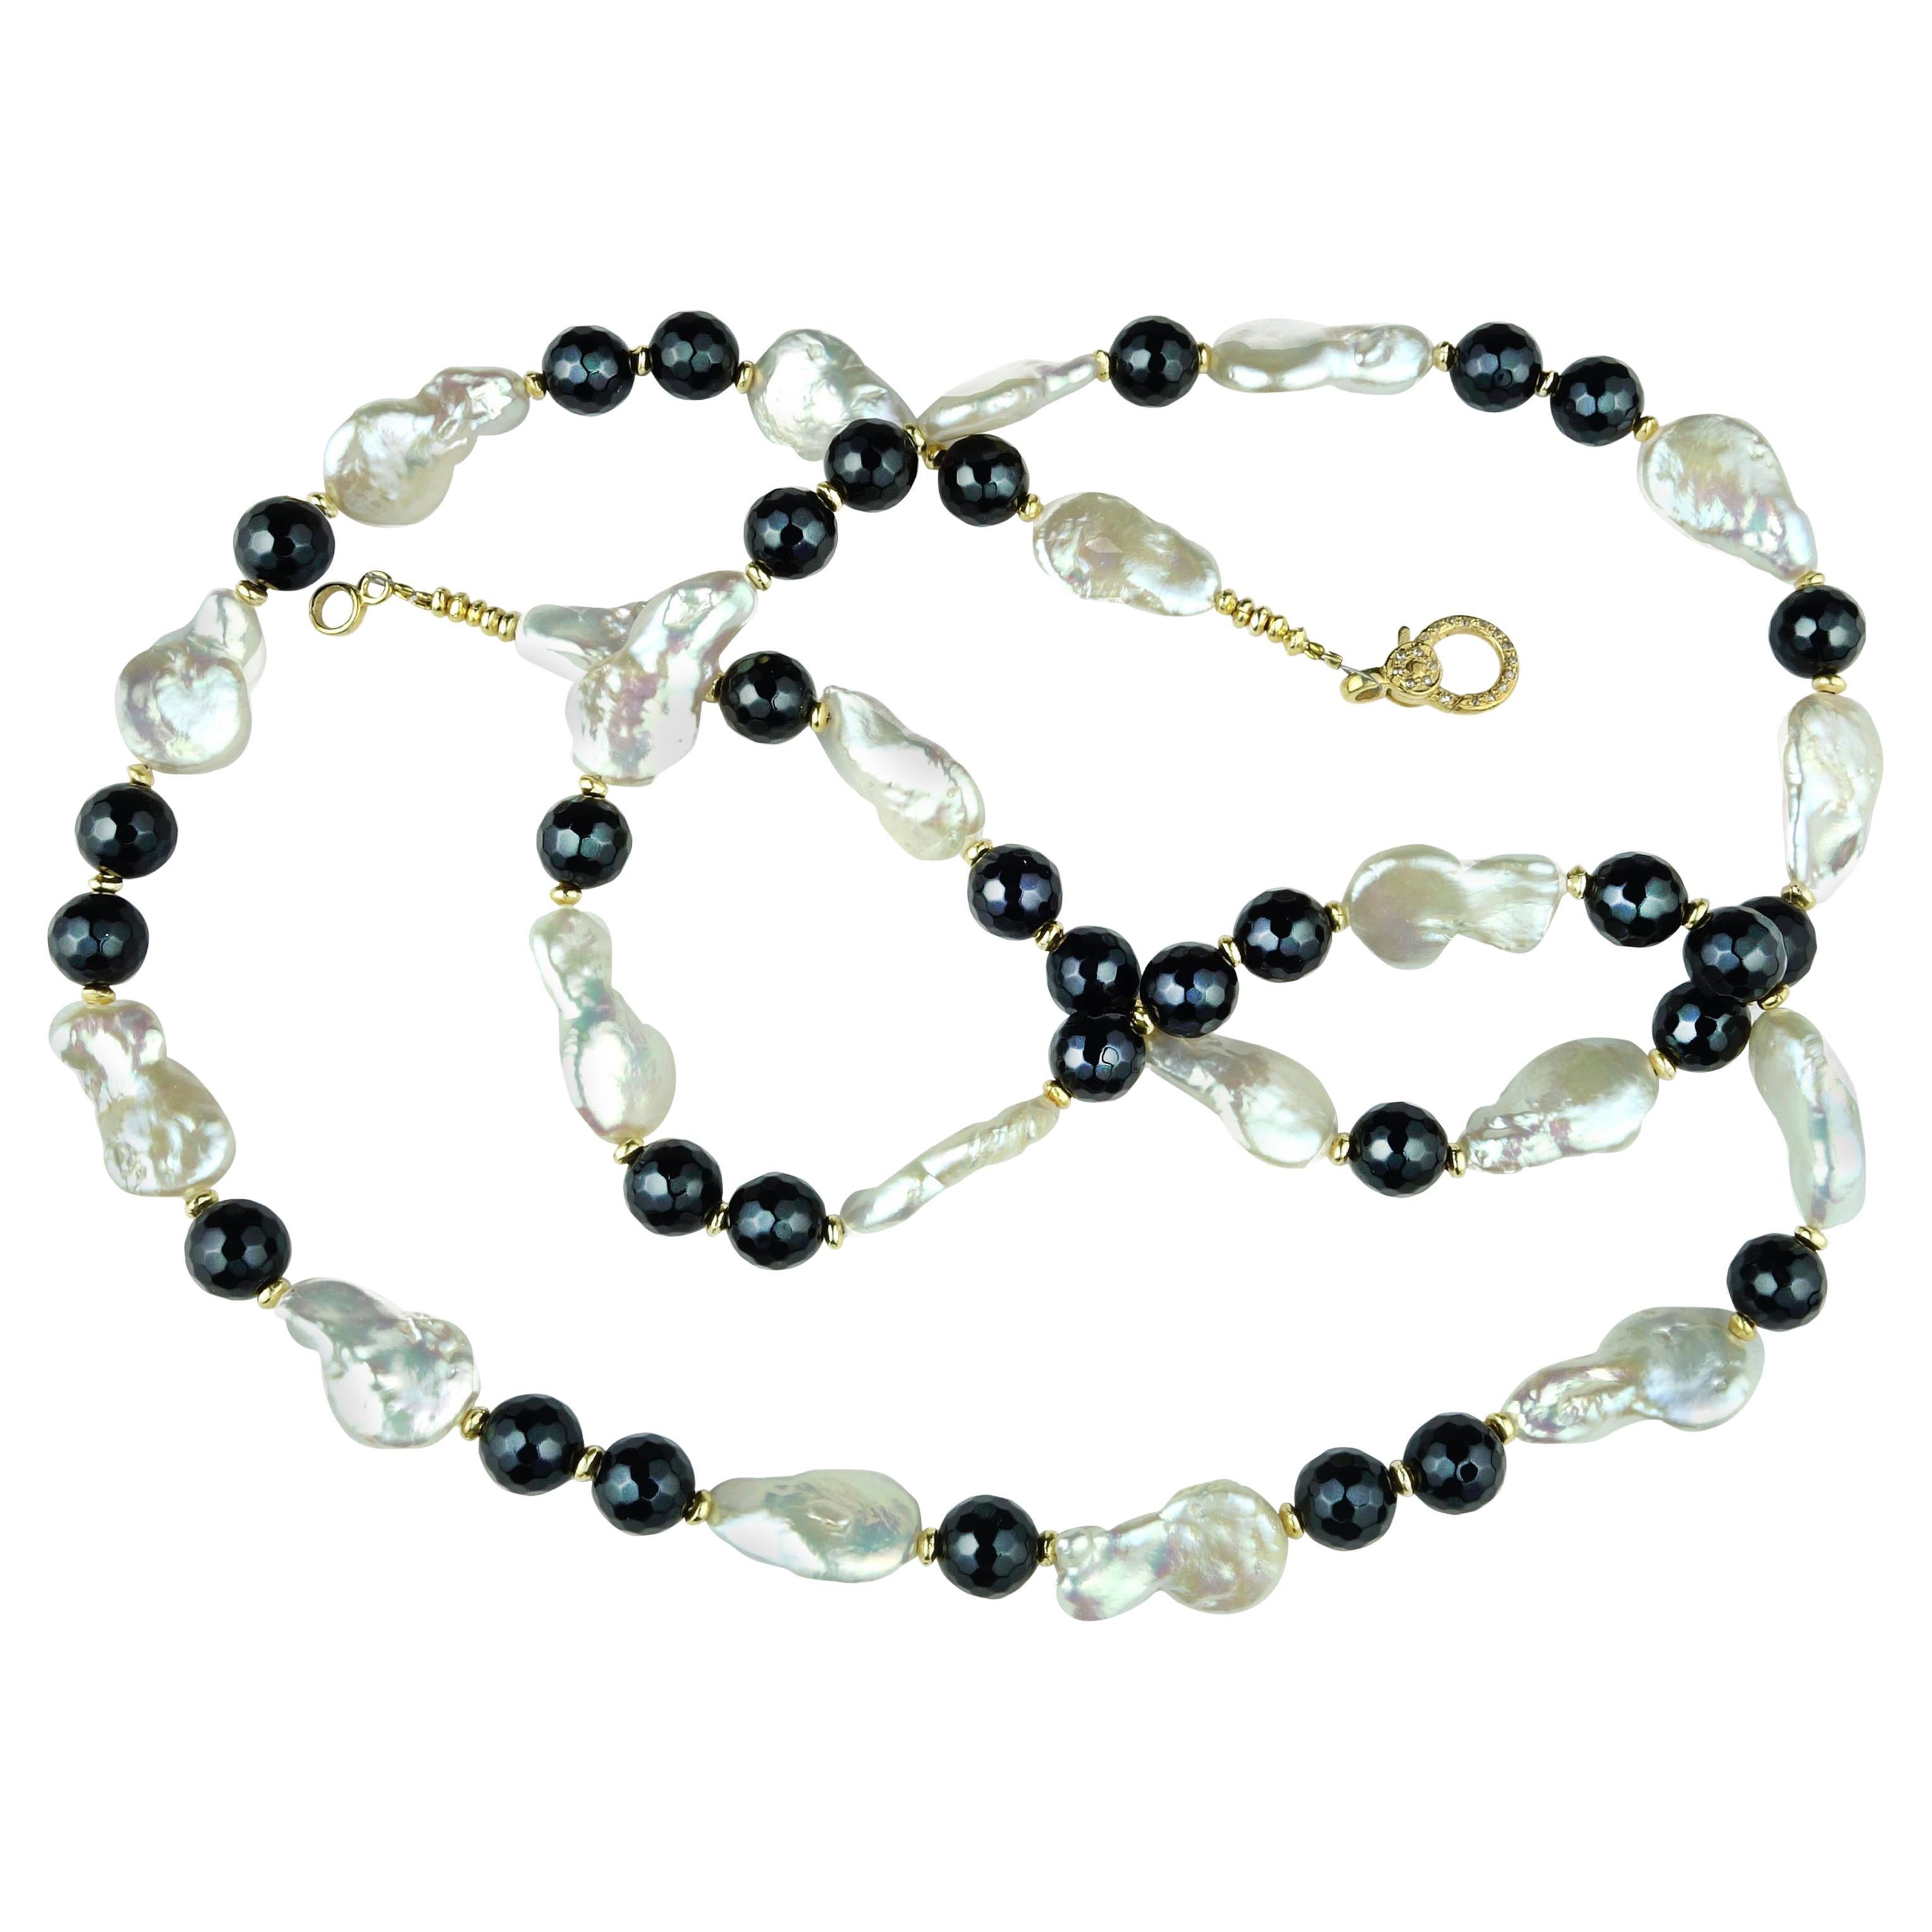 Own the jewelry you wish for

31 Inch, Custom made, striking pear shape Freshwater Pearls and Black Onyx necklace with goldtone accents. The iridescent pear shape Pearls are slightly graduated up to 18MM. The sparkling faceted 8MM Black Onyx beads